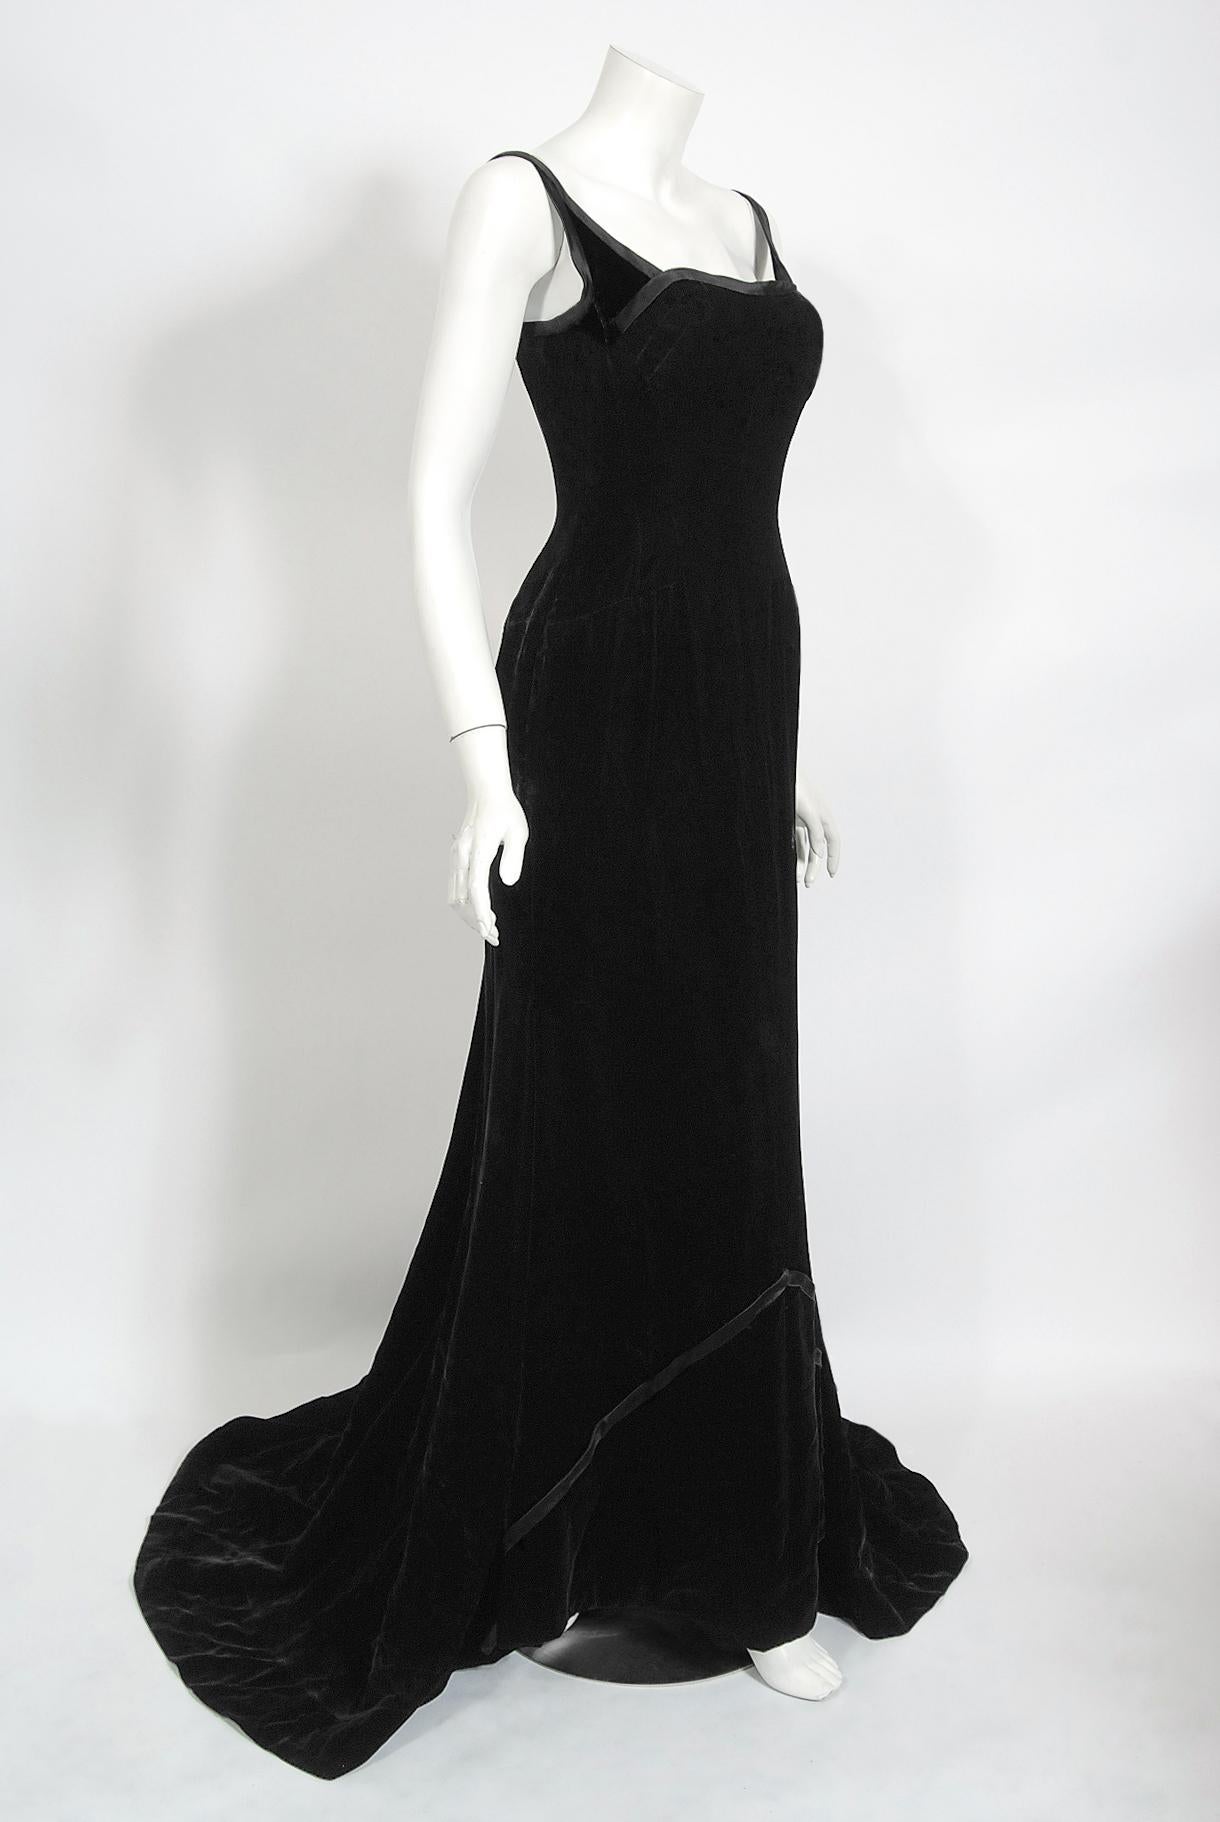 Vintage 1967 Don Loper Couture For Barbra Streisand Black Hourglass Gown & Hat 5